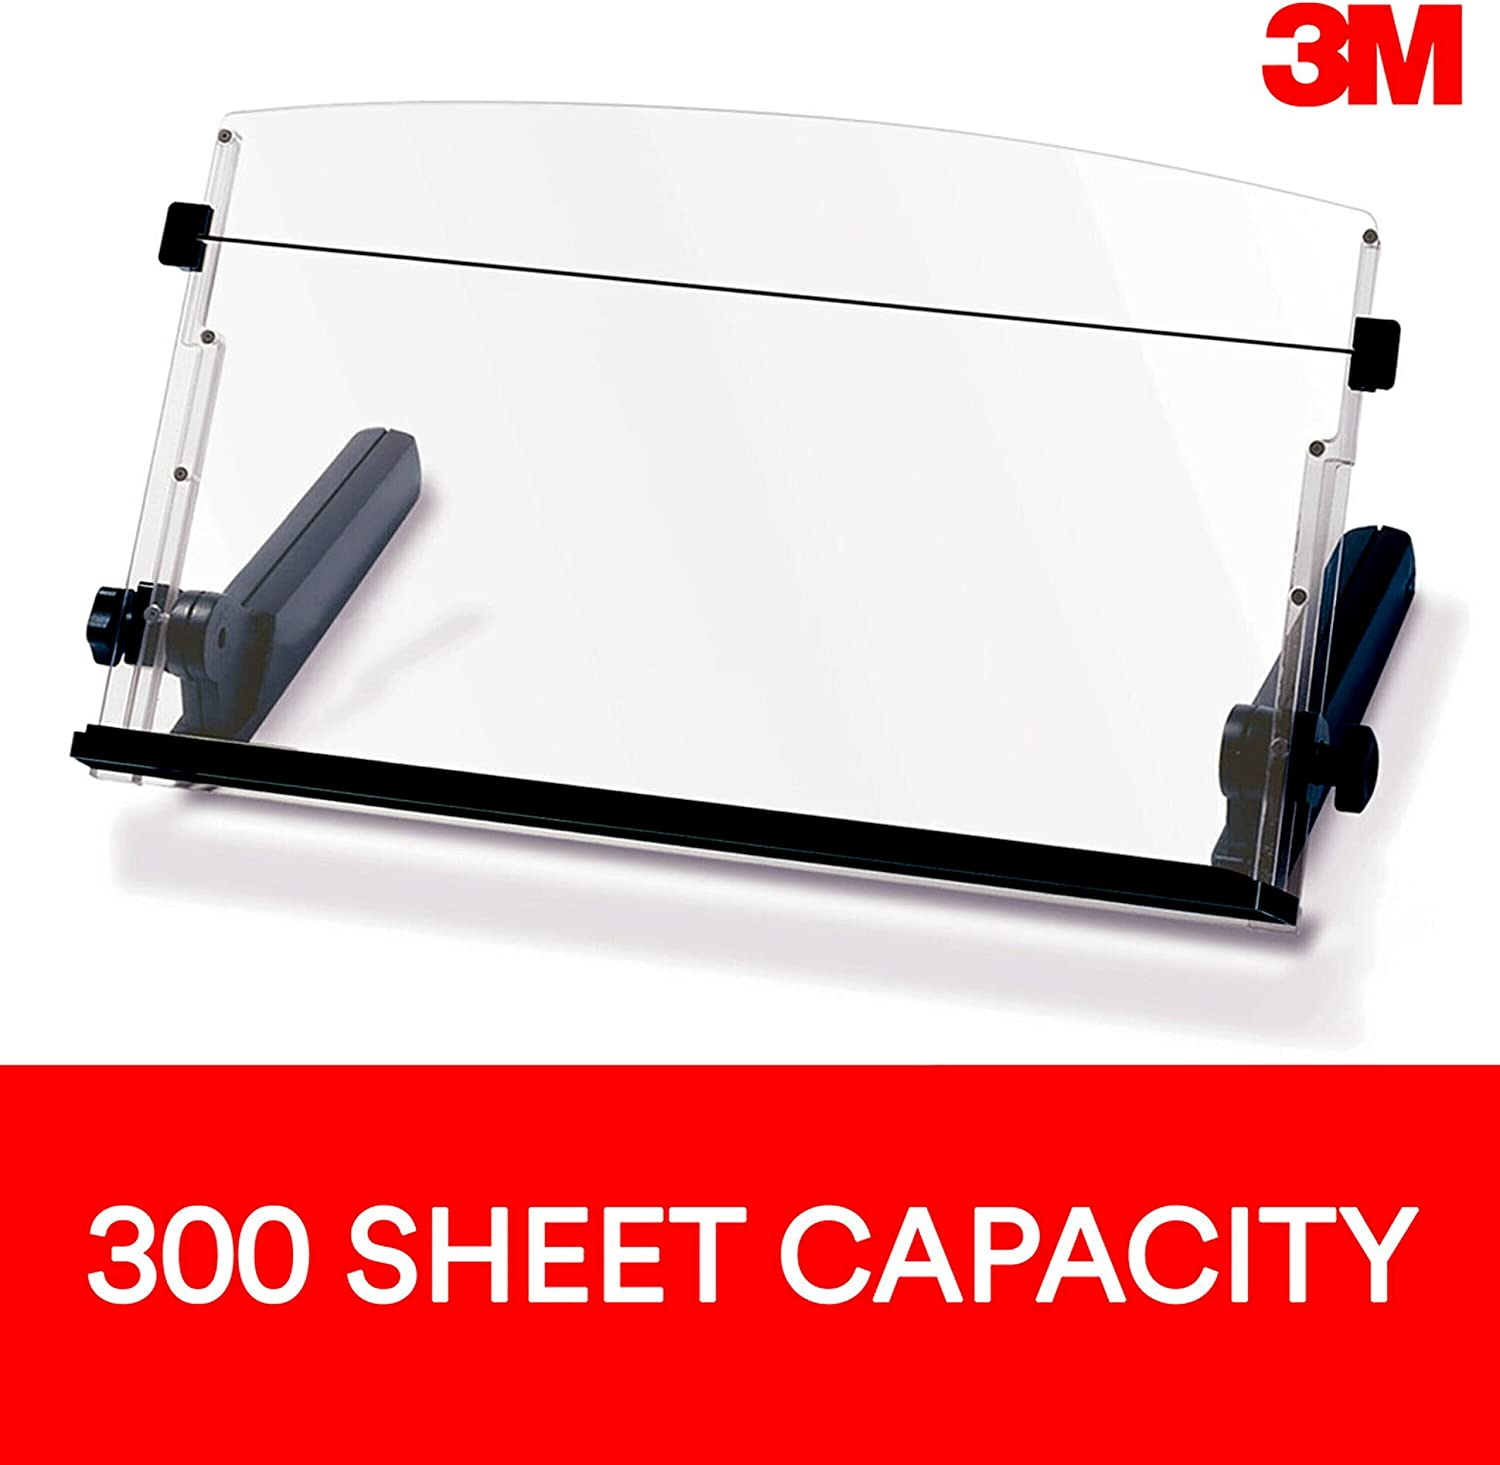 3M A3 Document Holder (DH640MB)